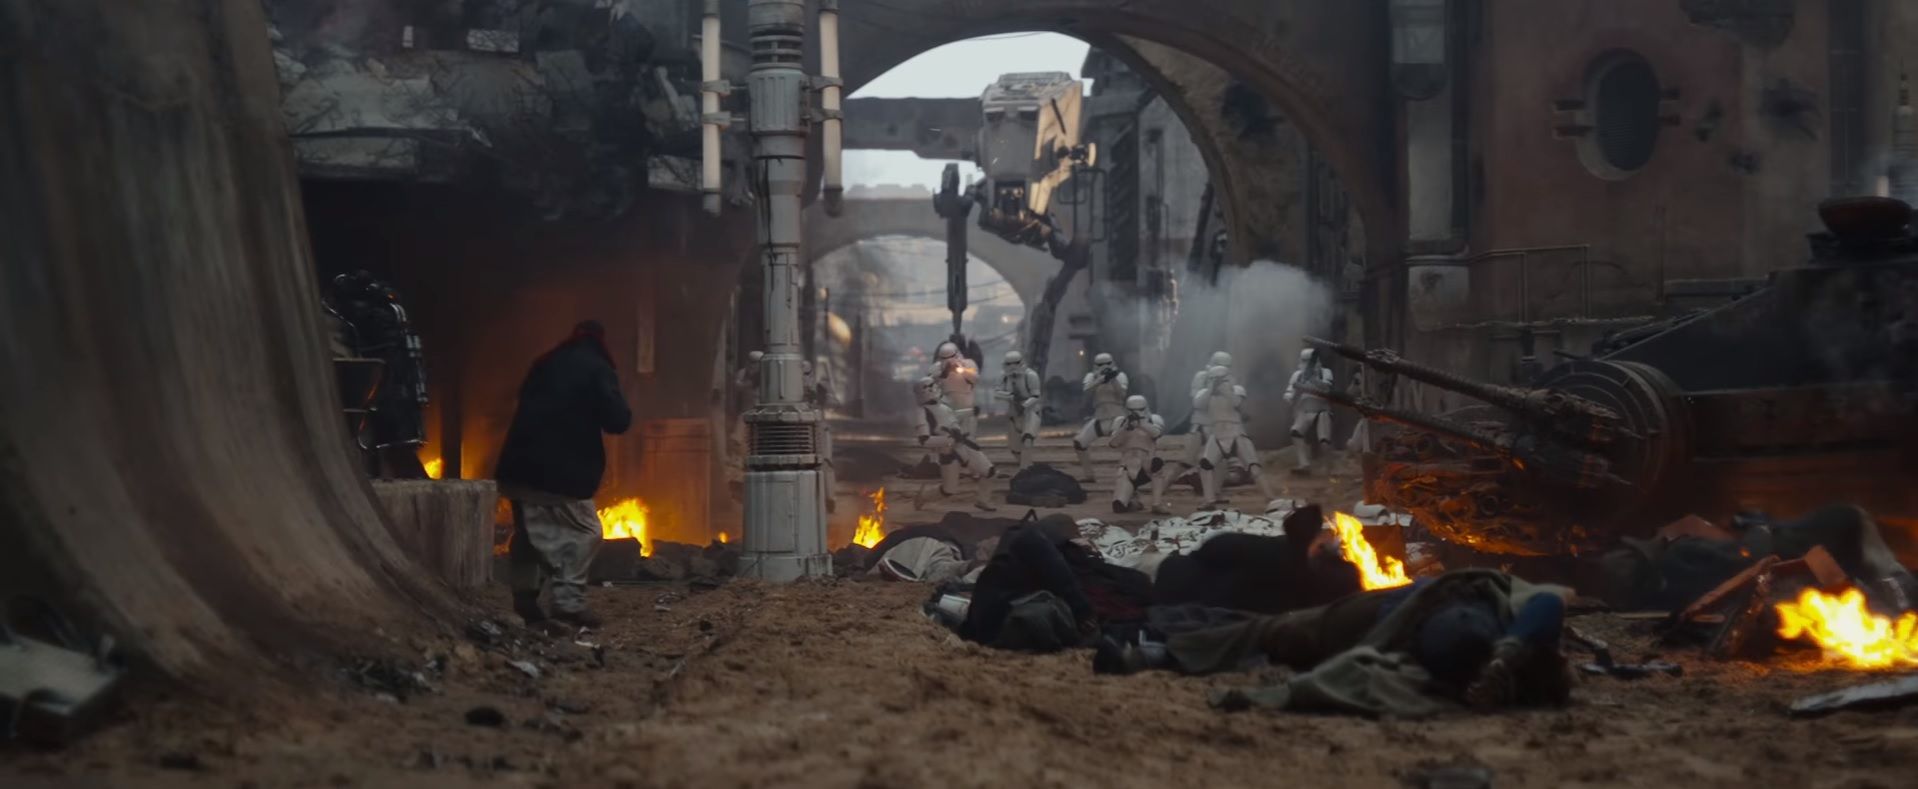 Rogue One A Star Wars Story Trailer 3 - AT-ST with Stormtroopers